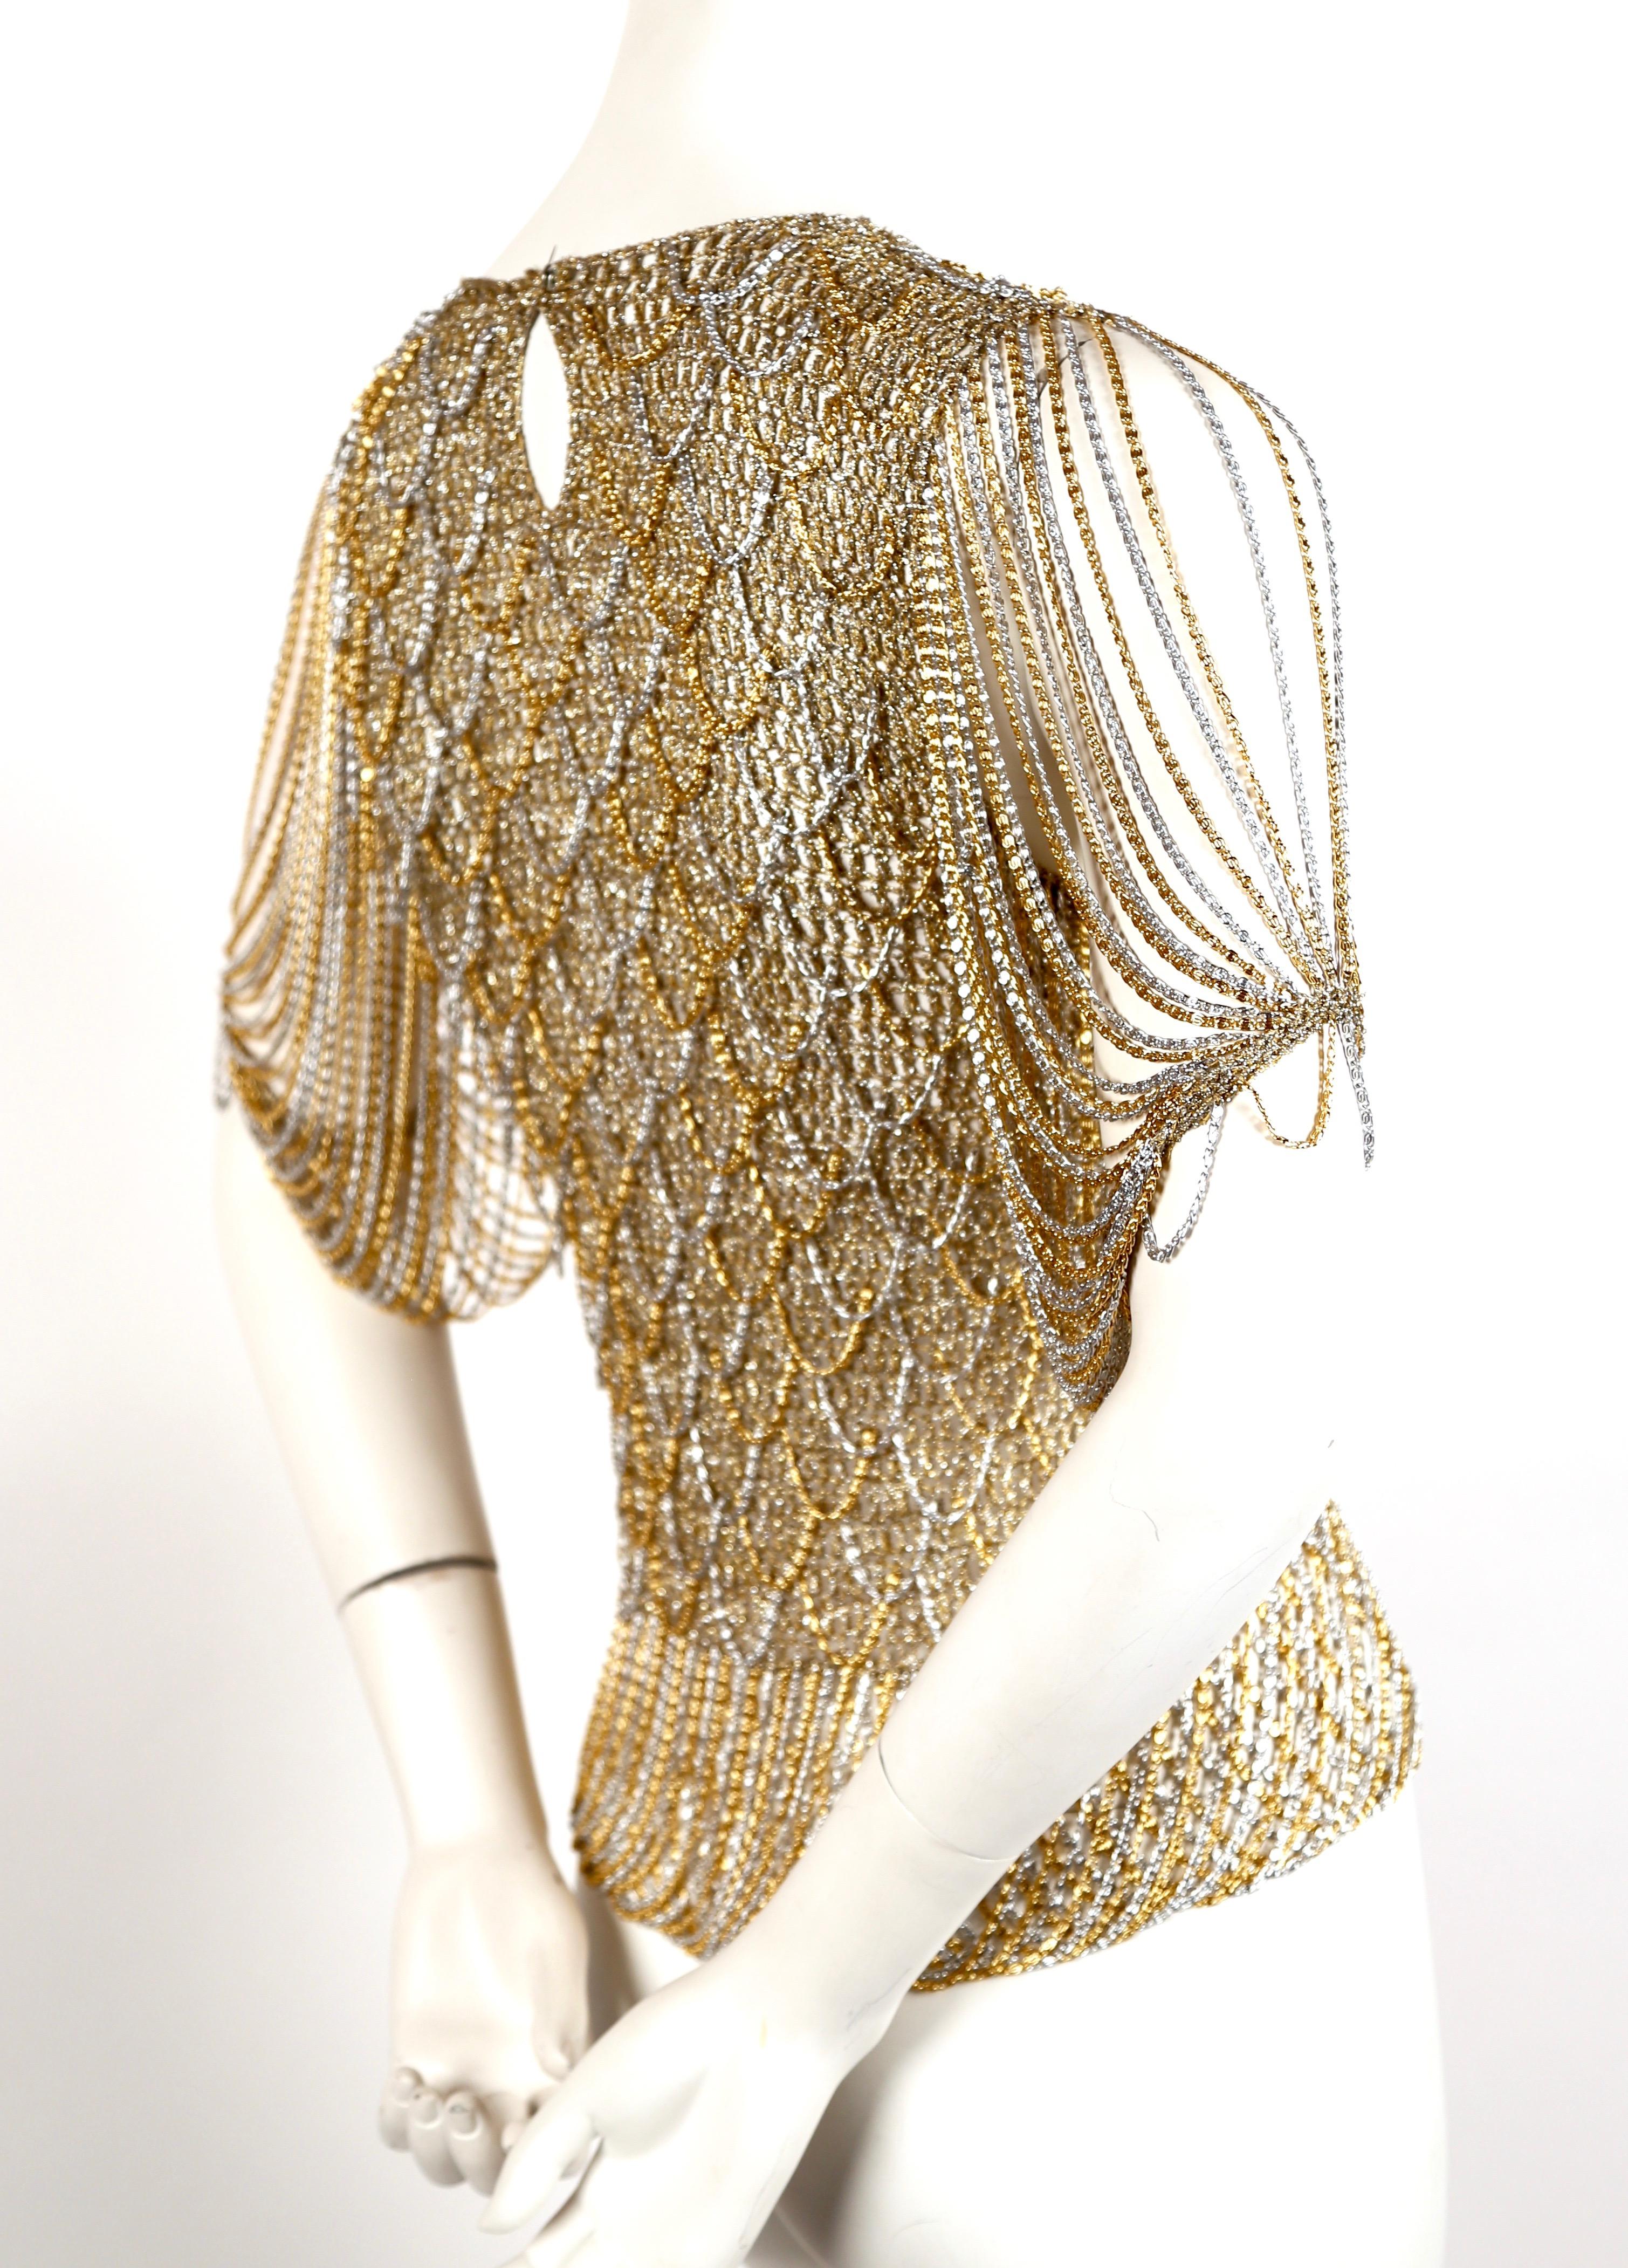 Woven gold and silver metallic sweater intertwined with chain from Loris Azzaro dating to the 1973. Exact style sweater as seen in the Helmut Newton photograph. Fits a size XS or S. Approximate measurements (unstretched): 26